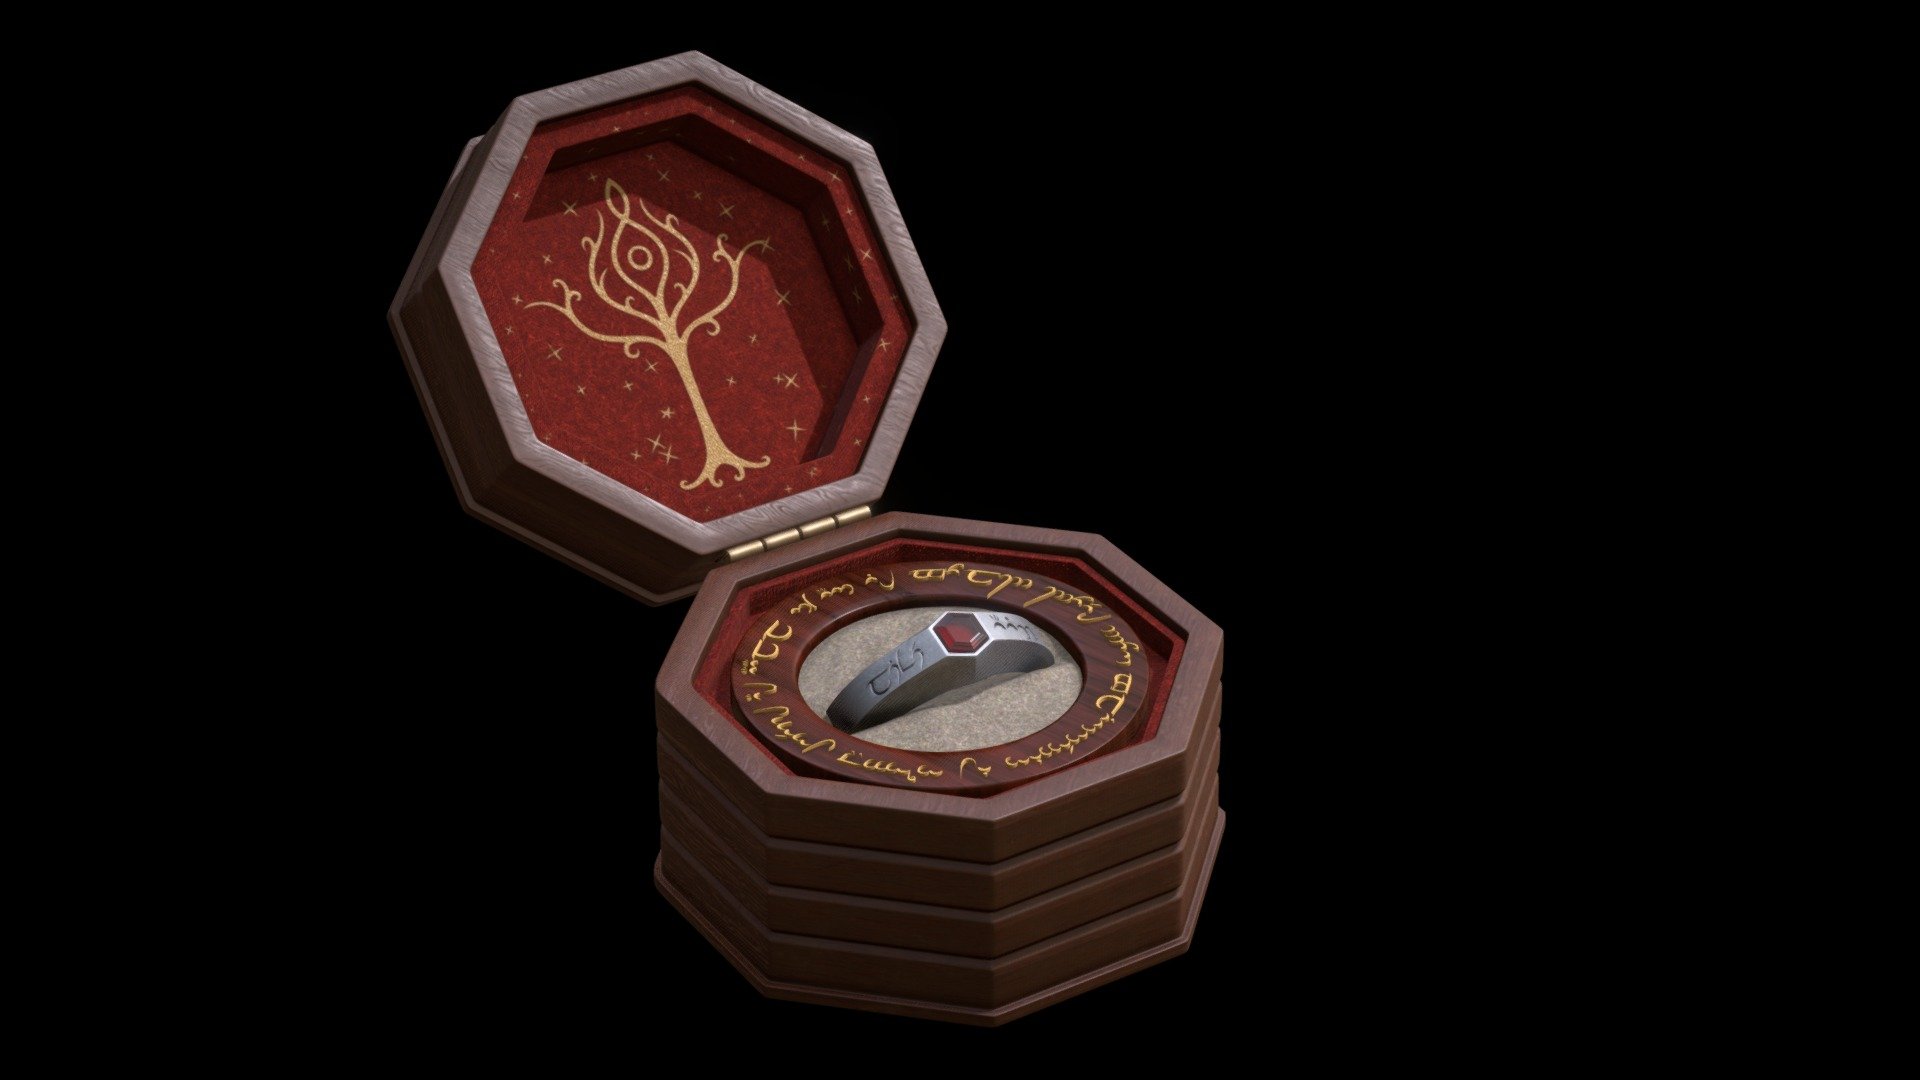 A silver elvish ring, showcasing a deep red garnet, set in a wooden and felt lined box. Created and textured in Blender. The engraving on the ring translates to water and life in Elvish.

For this peice I wanted to create something that combined sculpting, traditional modelling and texture painting. I created a highly detailed ring with some deep engravings and then moved onto the ring box. I utilised the upper ring box to showcase a detailed ornate elvish drawing, and accented it with stars. 

Overall a simplier piece but it turned out really nicely, especially with the overall color combination to give it a warm vibe 3d model